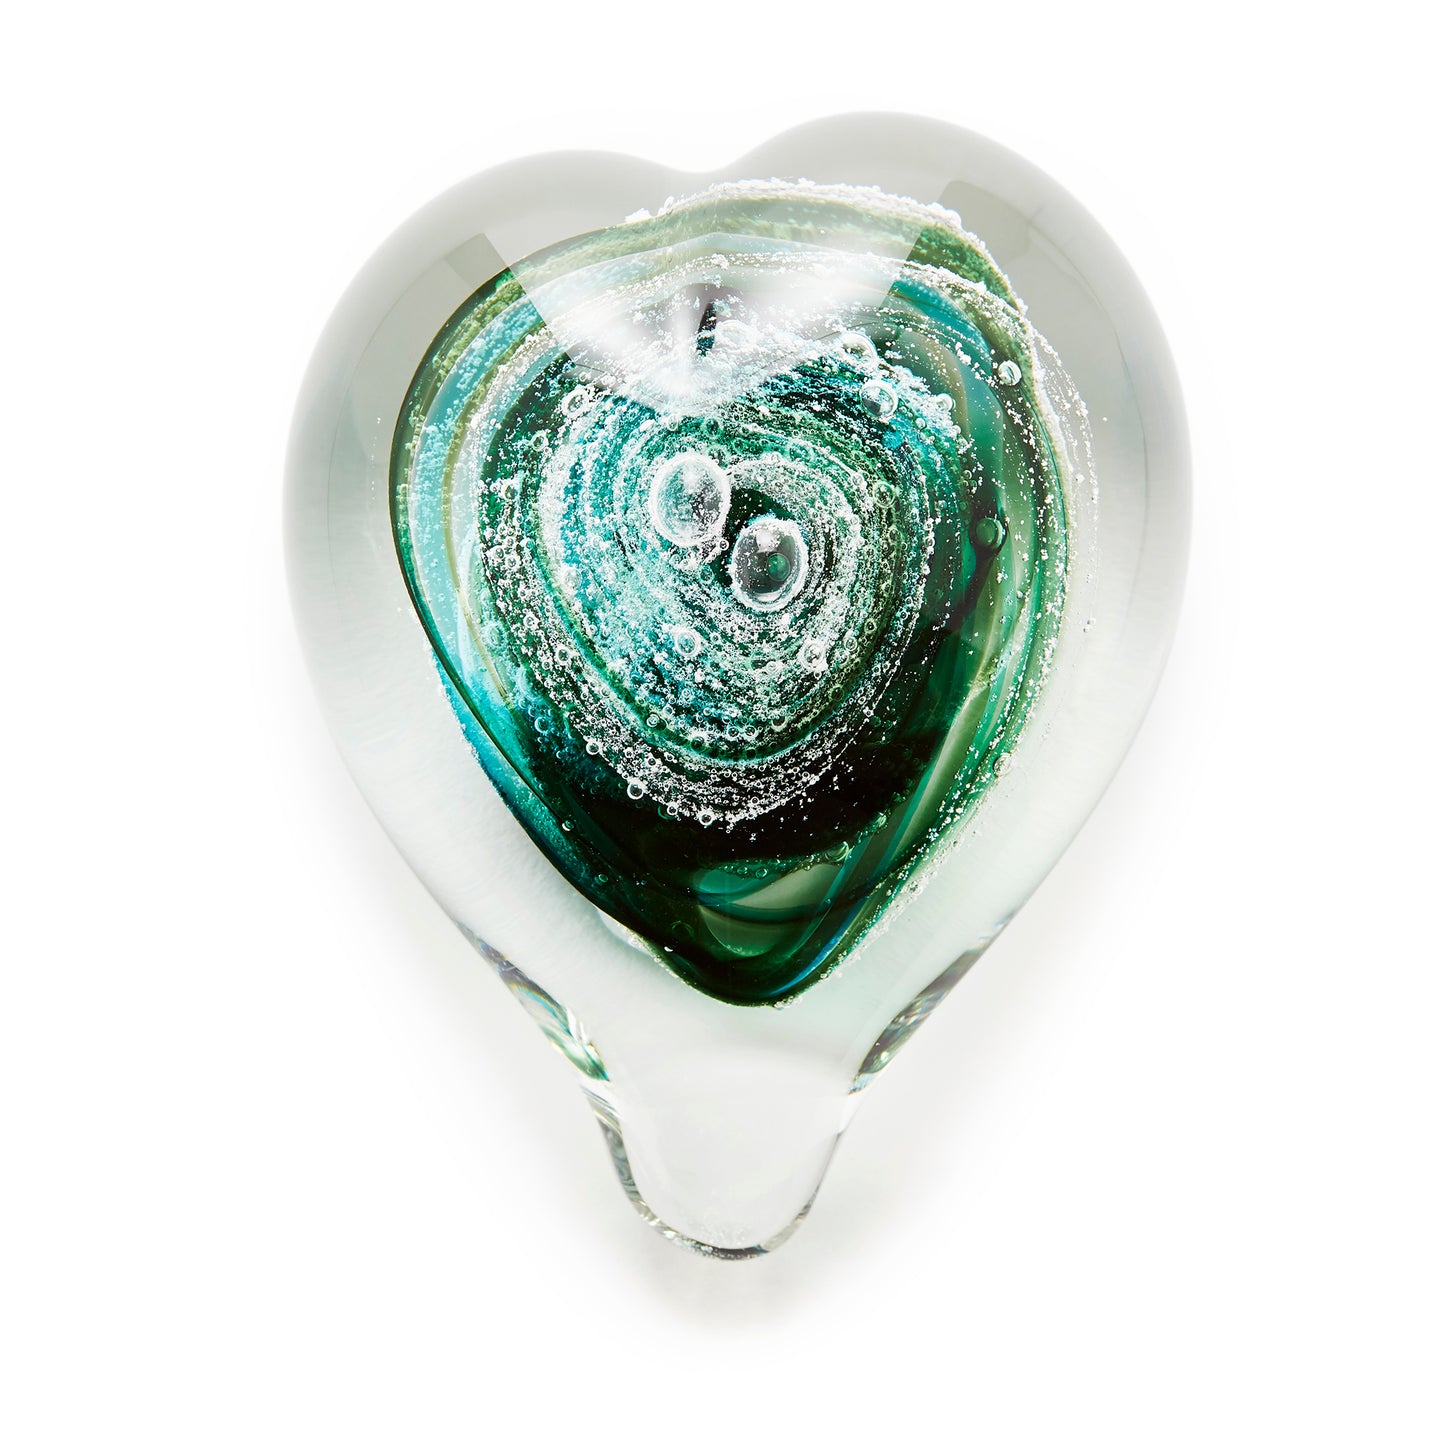 Memorial glass art heart paperweight with cremation ash. Green glass. Colour combination is called “Emerald.”